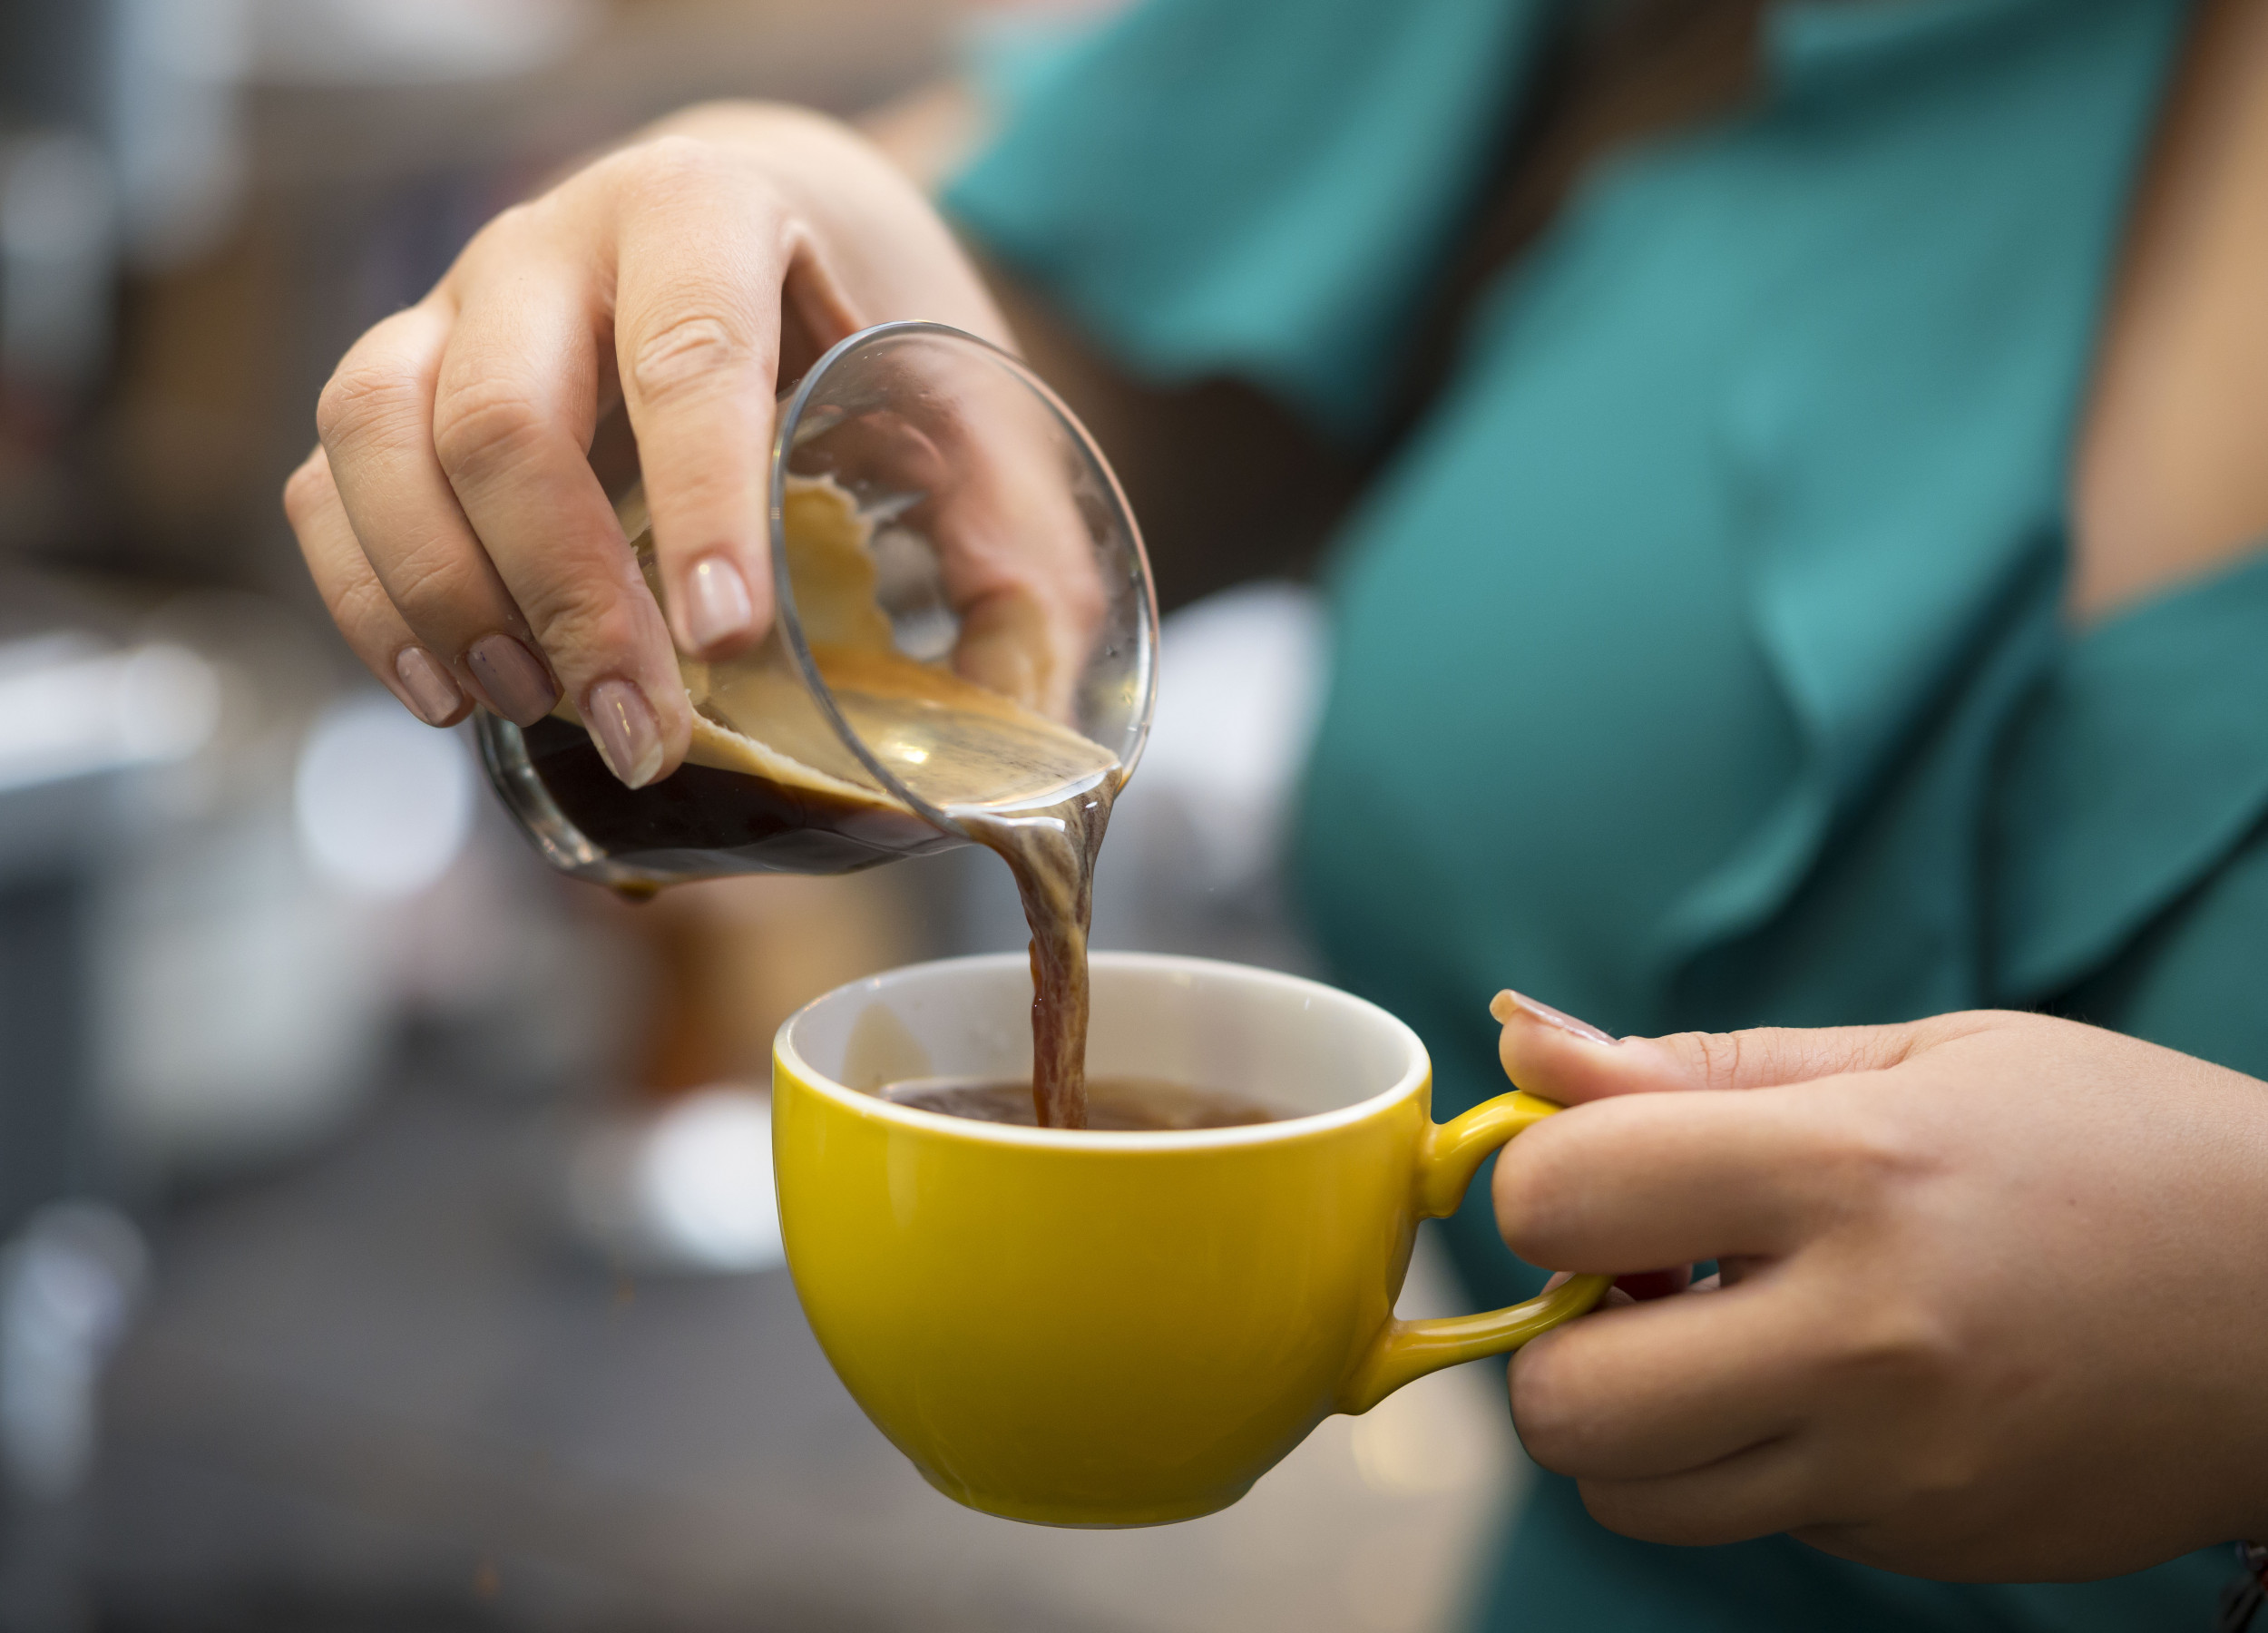 Drinking coffee in the morning has these benefits, also helpful in weight loss